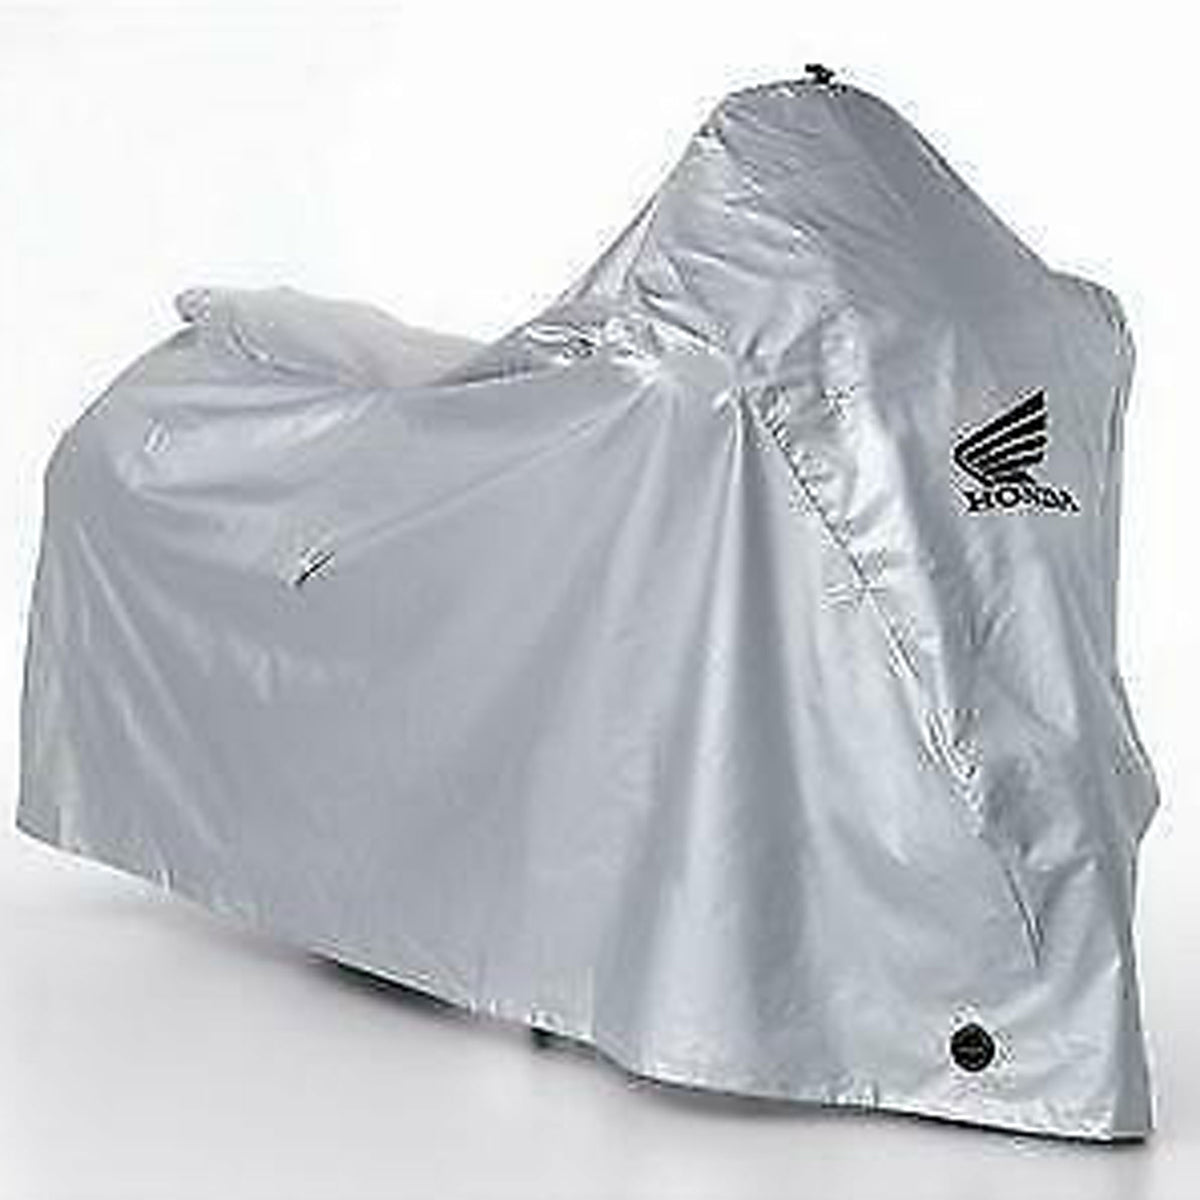 SH125i - Outdoor Motorcycle Cover